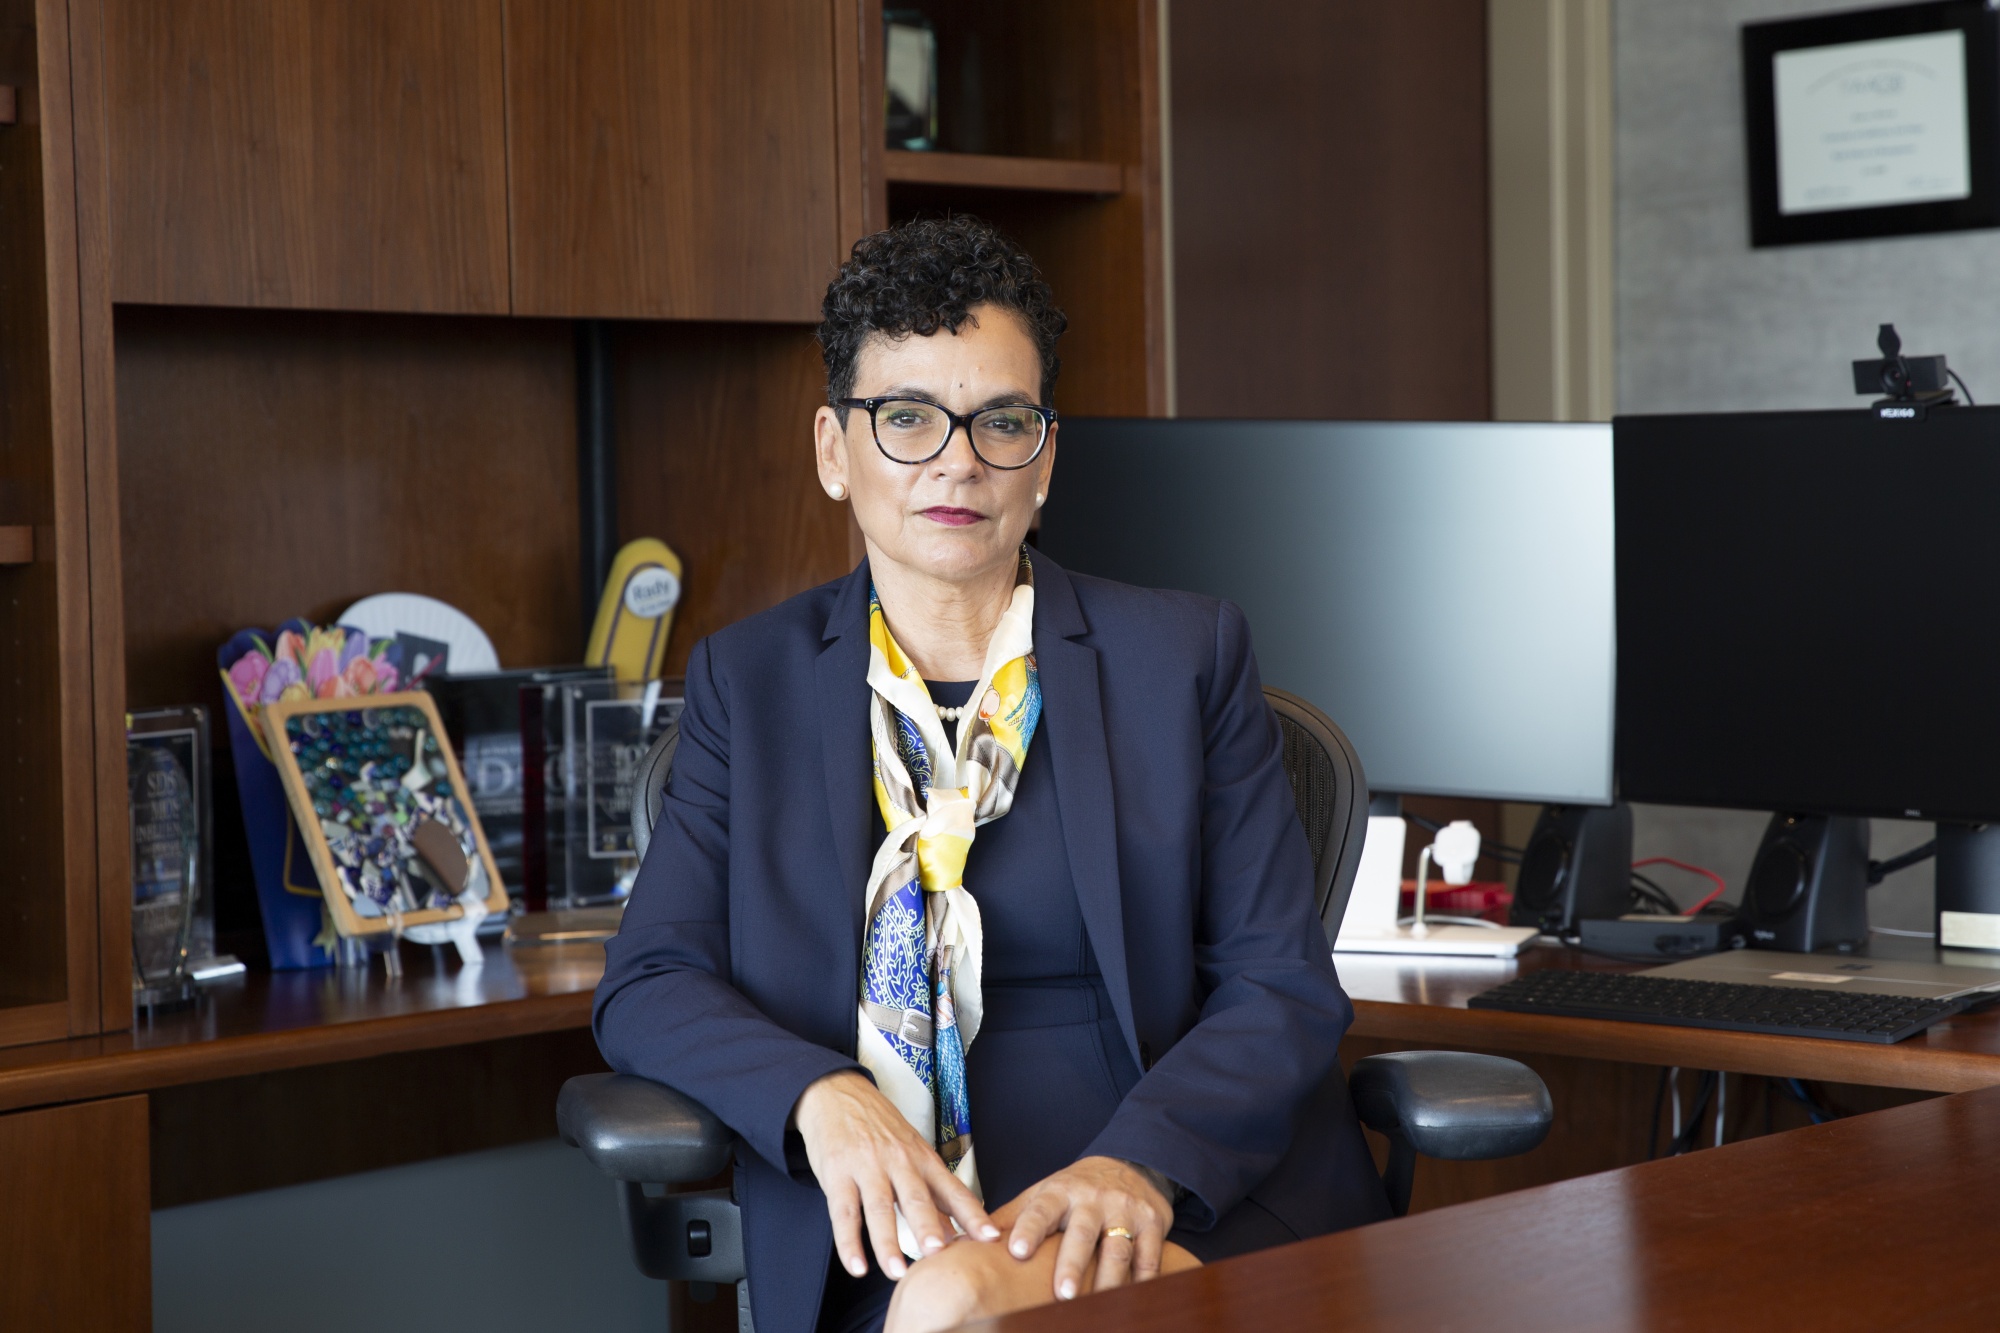 Lisa Ordóñez, dean of the Rady School of Management at the University of California at San Diego.